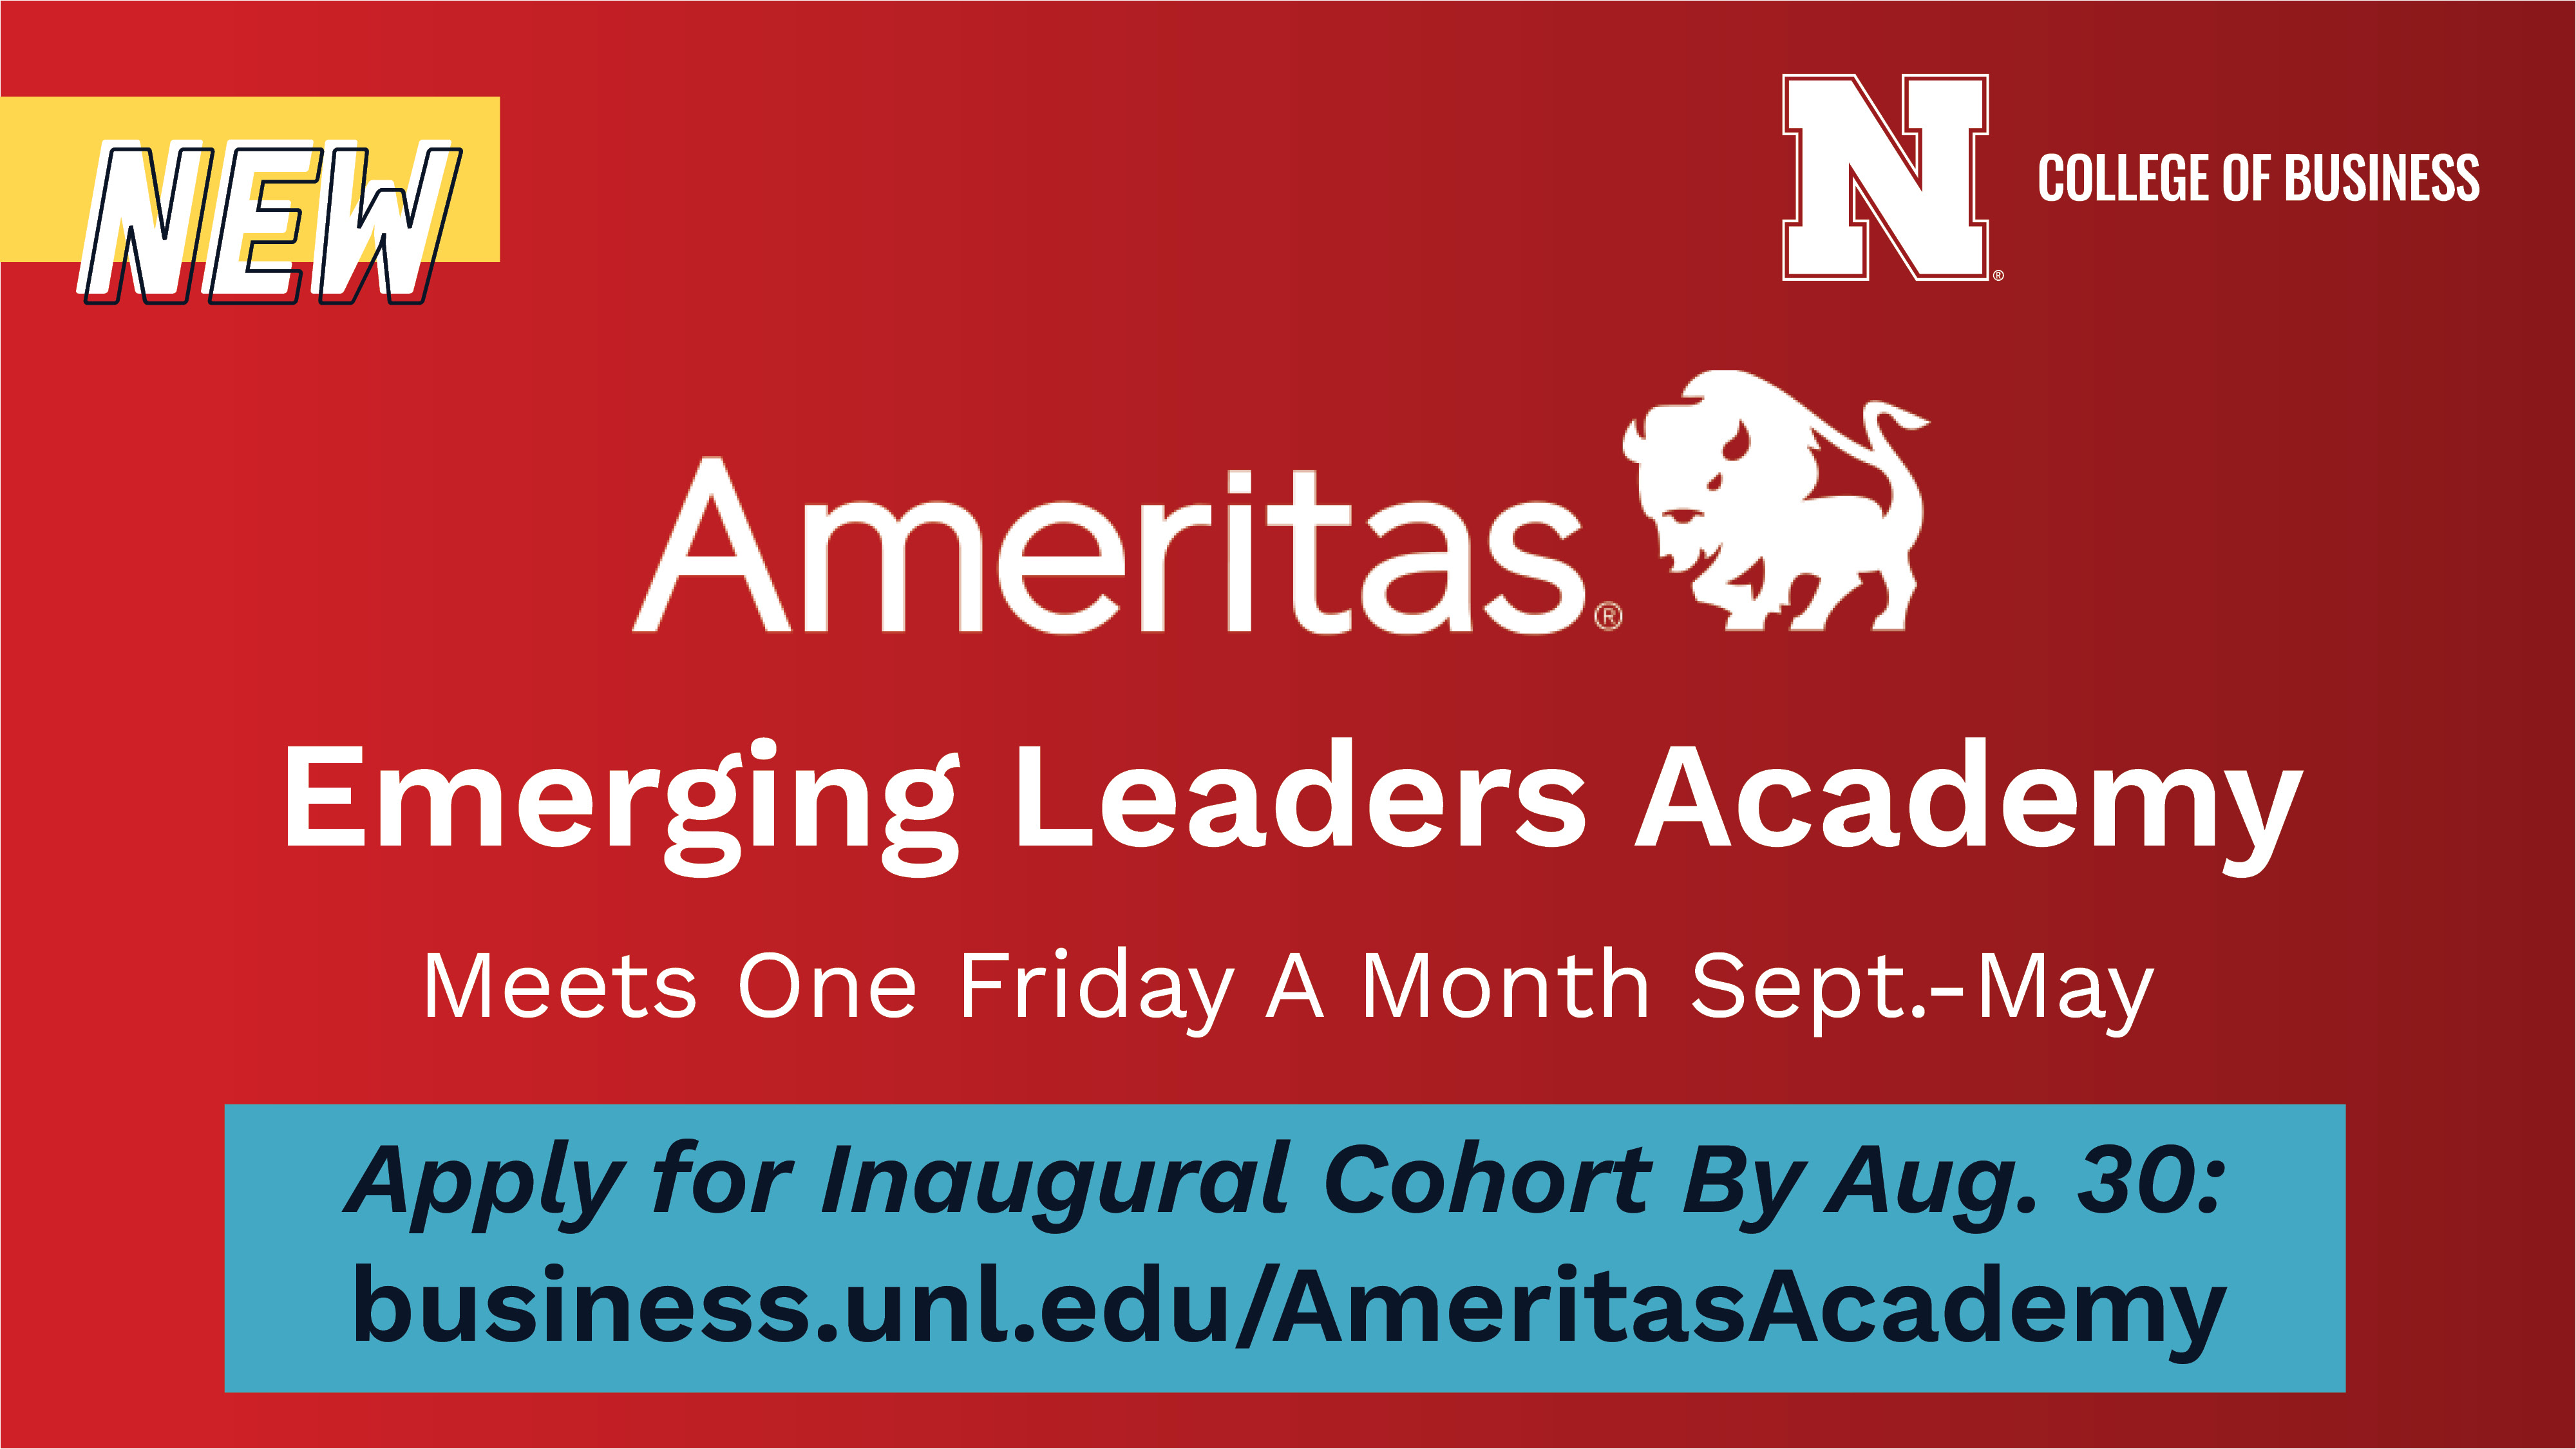 Join the Inaugural Cohort of the Ameritas Emerging Leaders Academy